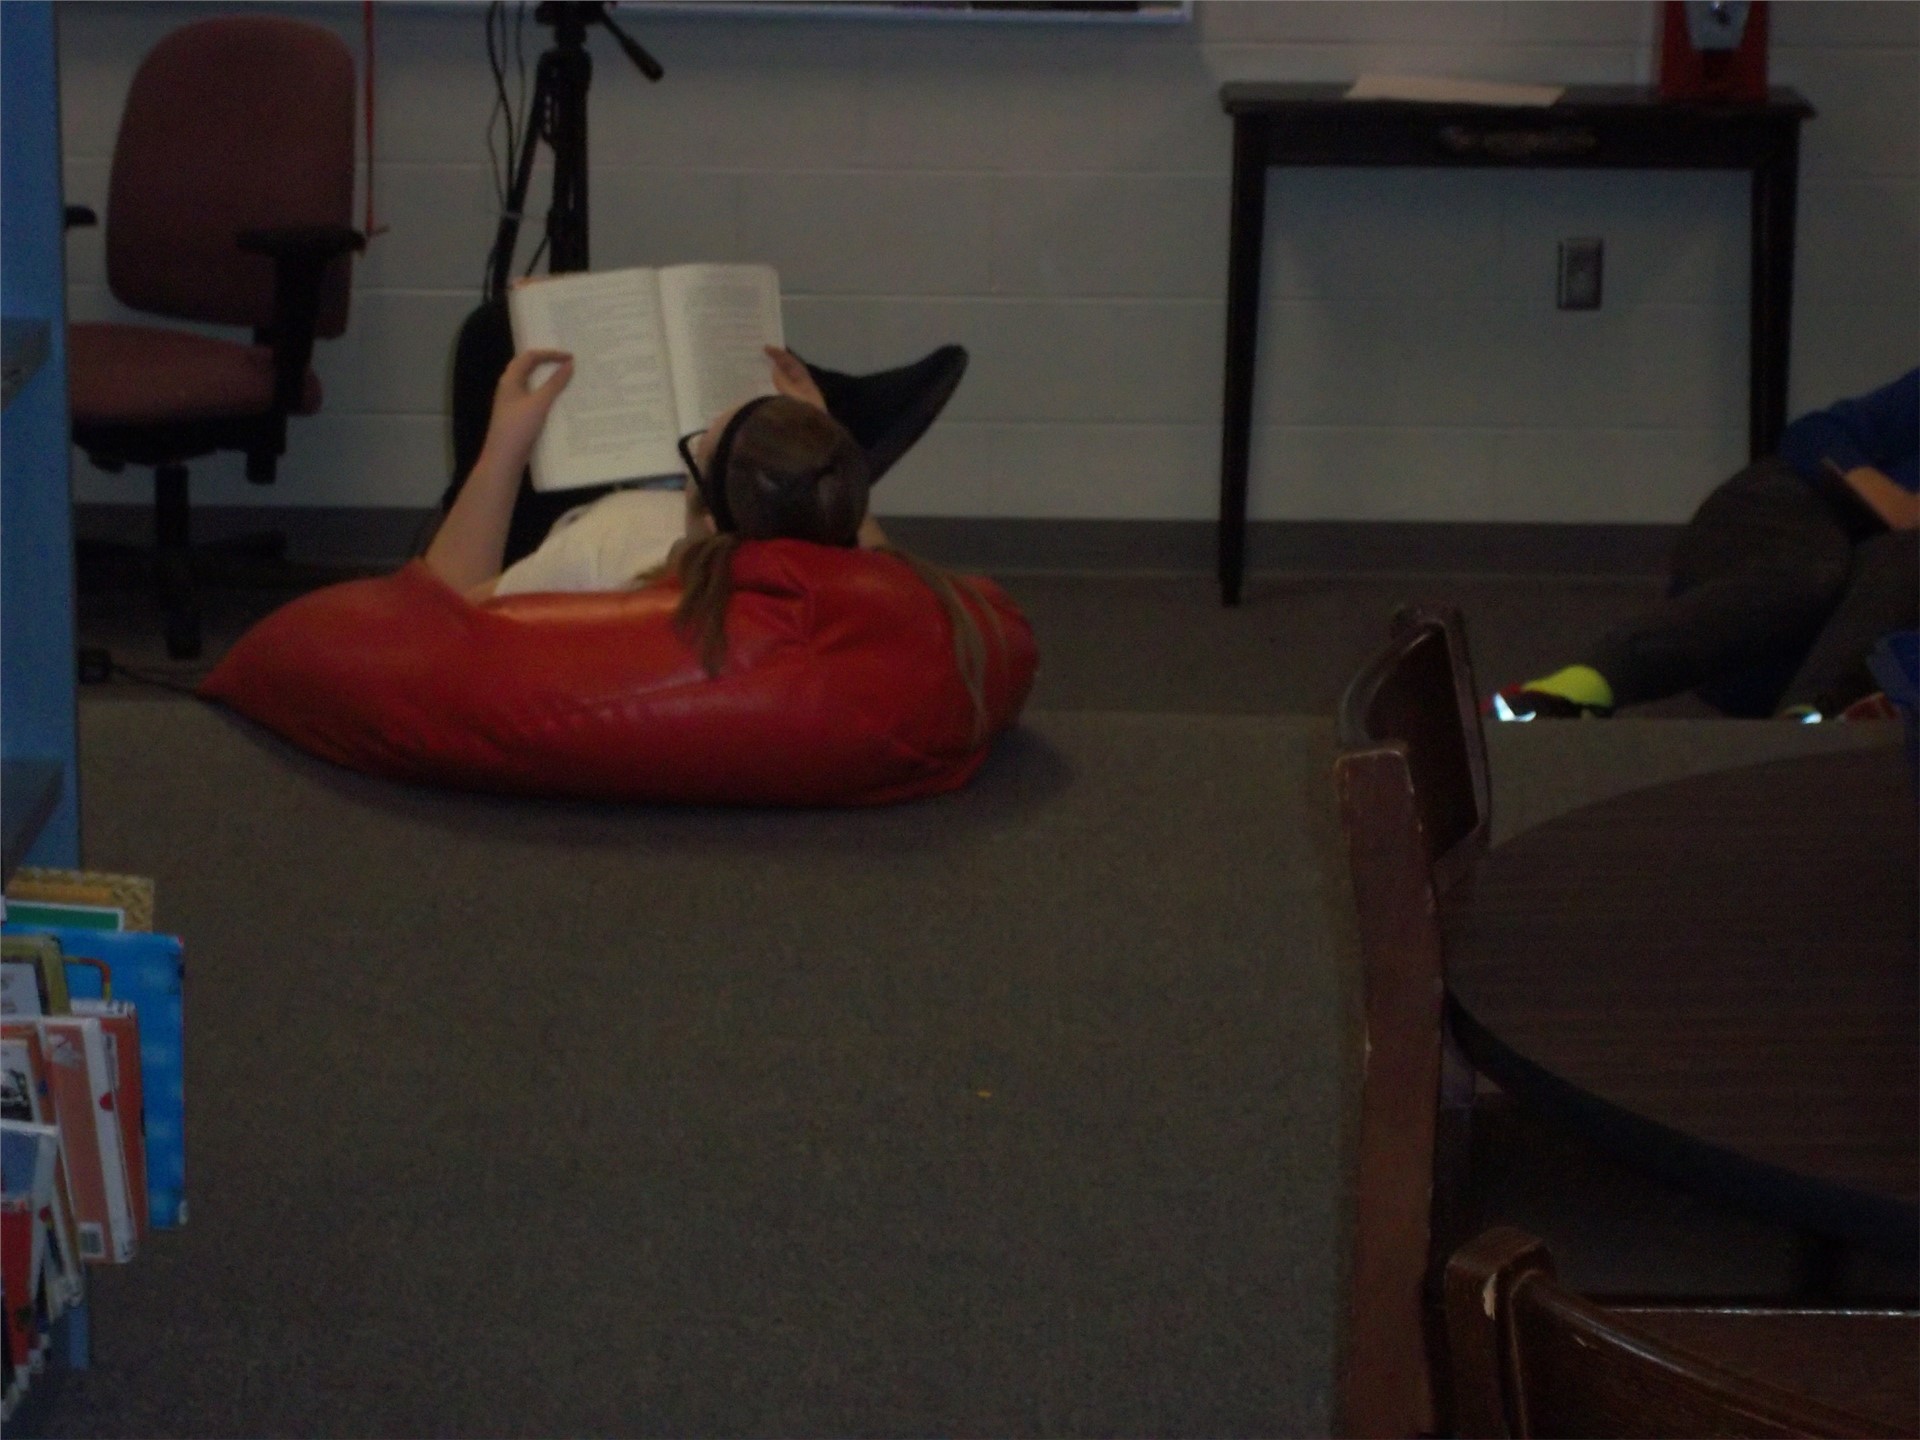 Student reading in bean bag chair.